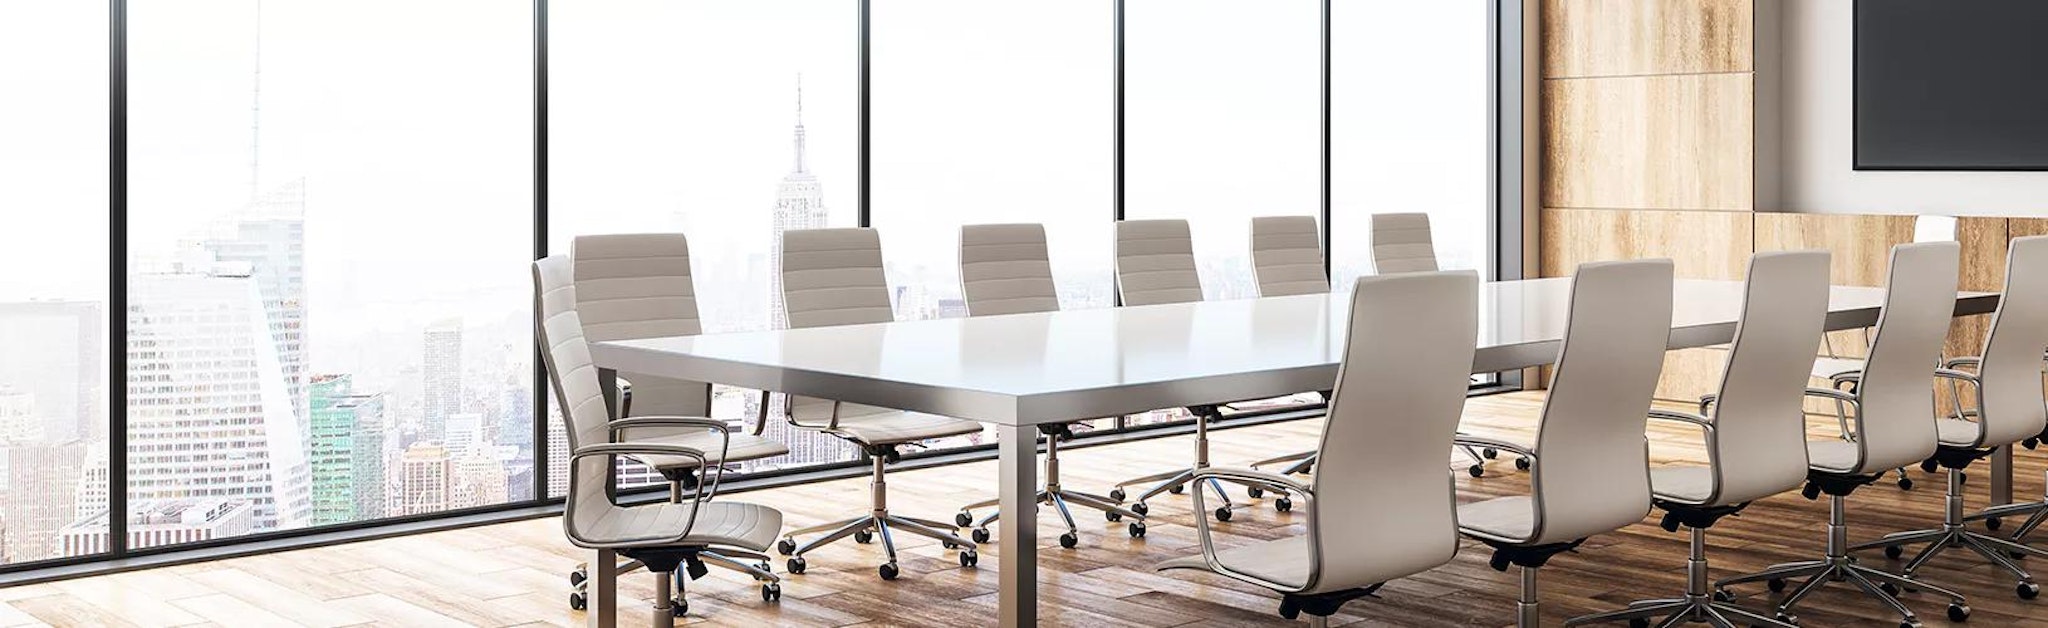 Image of a boardroom where colleagues use audit management software